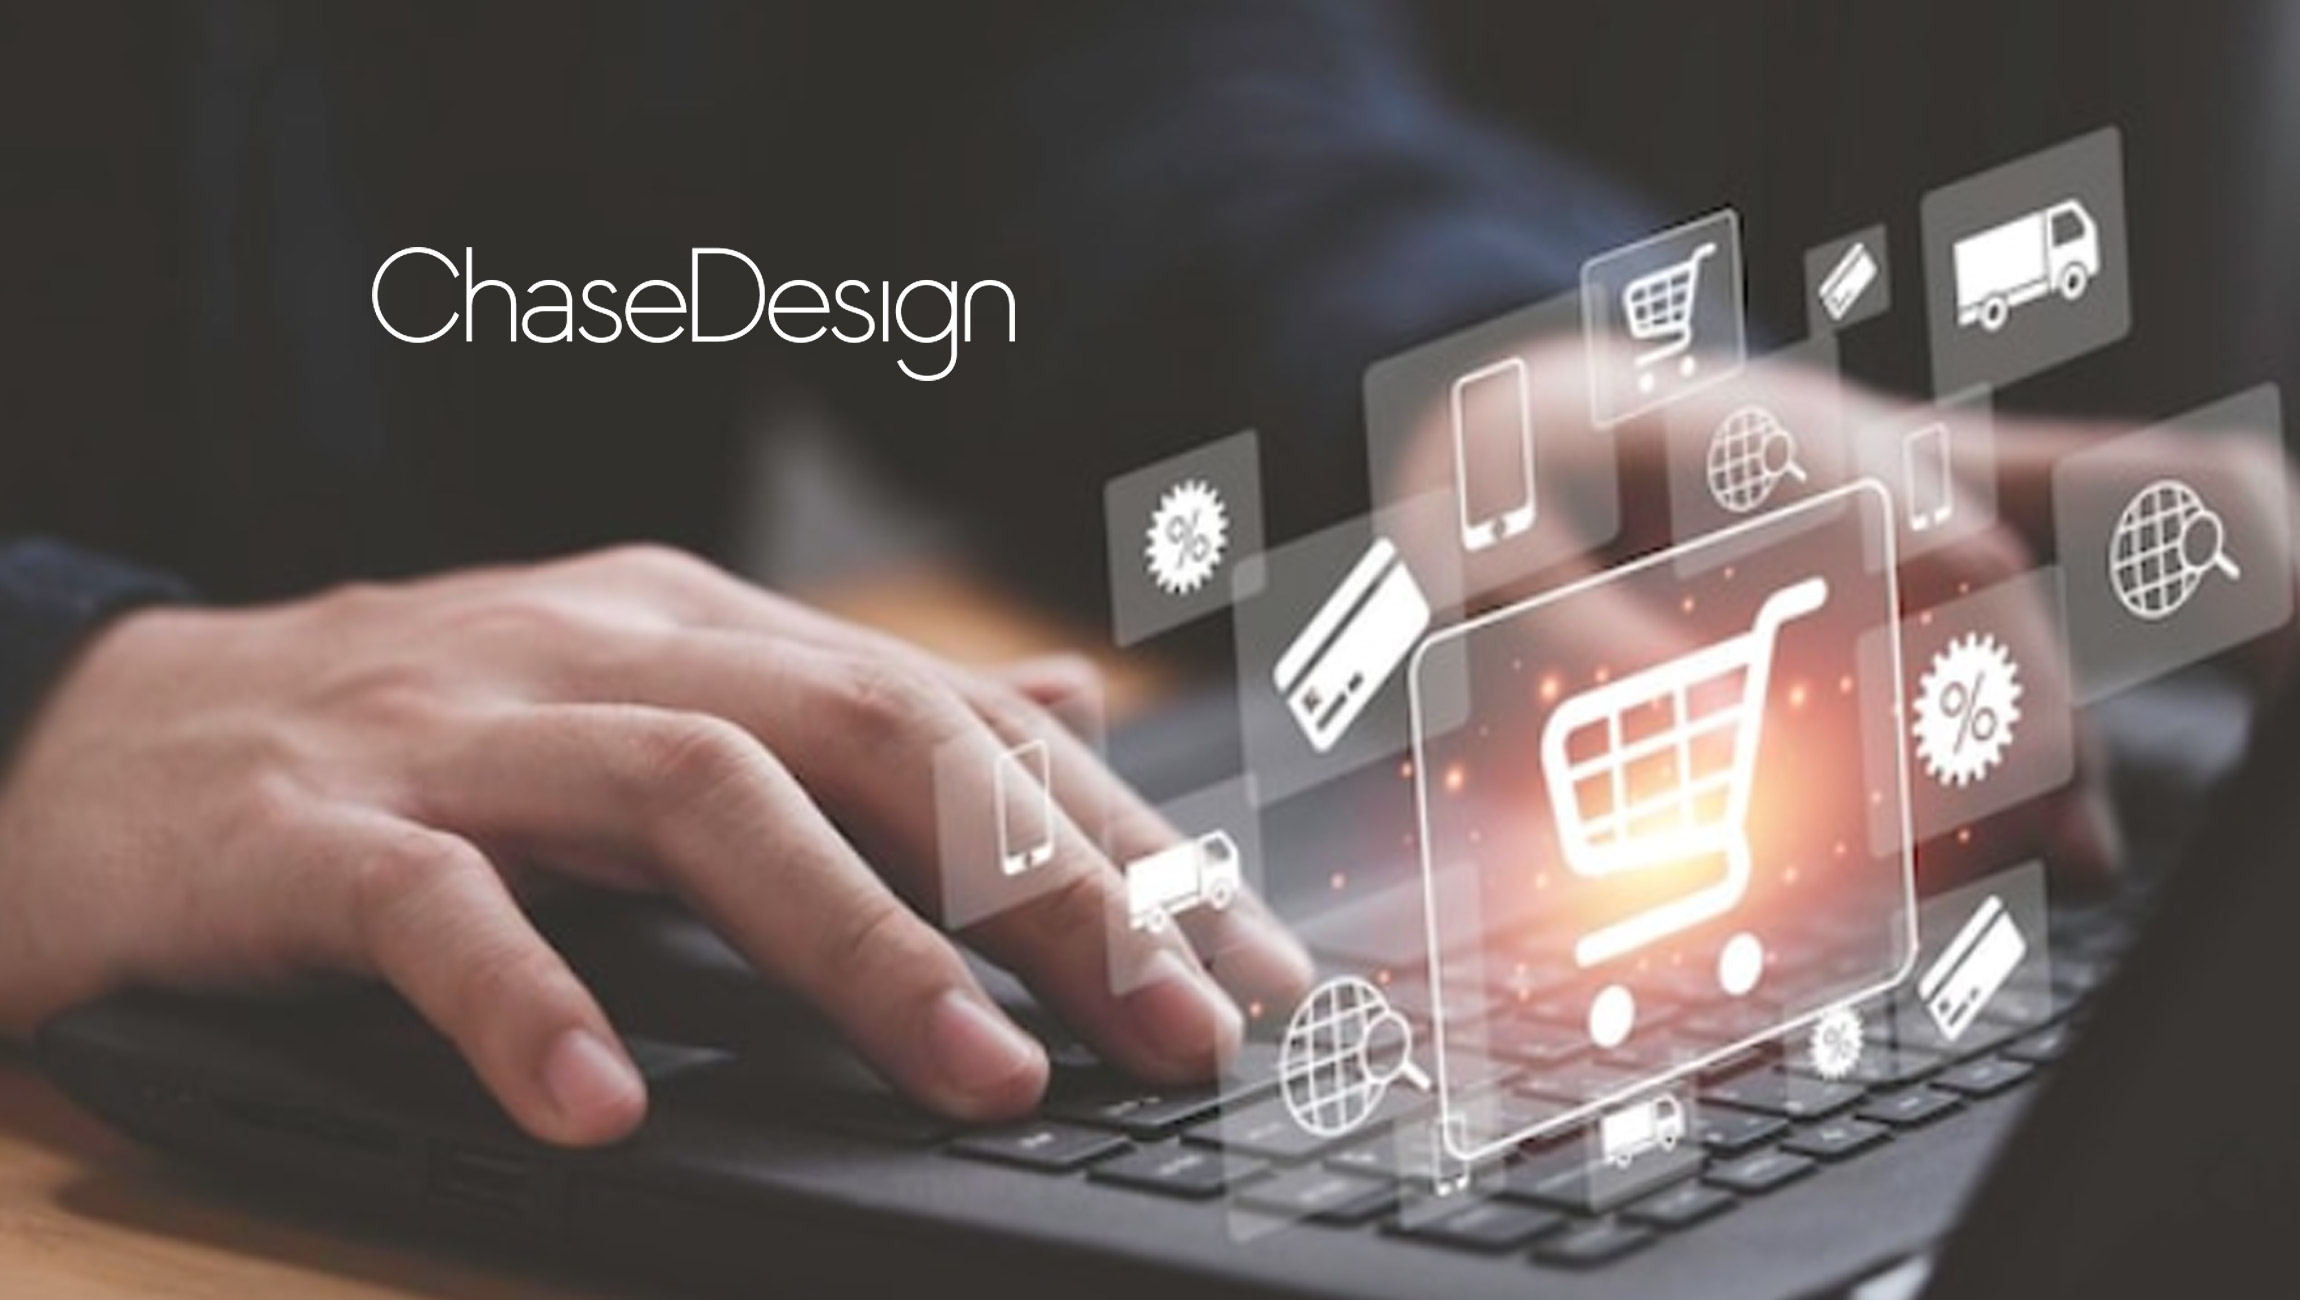 Shoppers’ Expectations of Tech at Retail are High Yet Often Unmet, New ChaseDesign|JGA Survey Shows